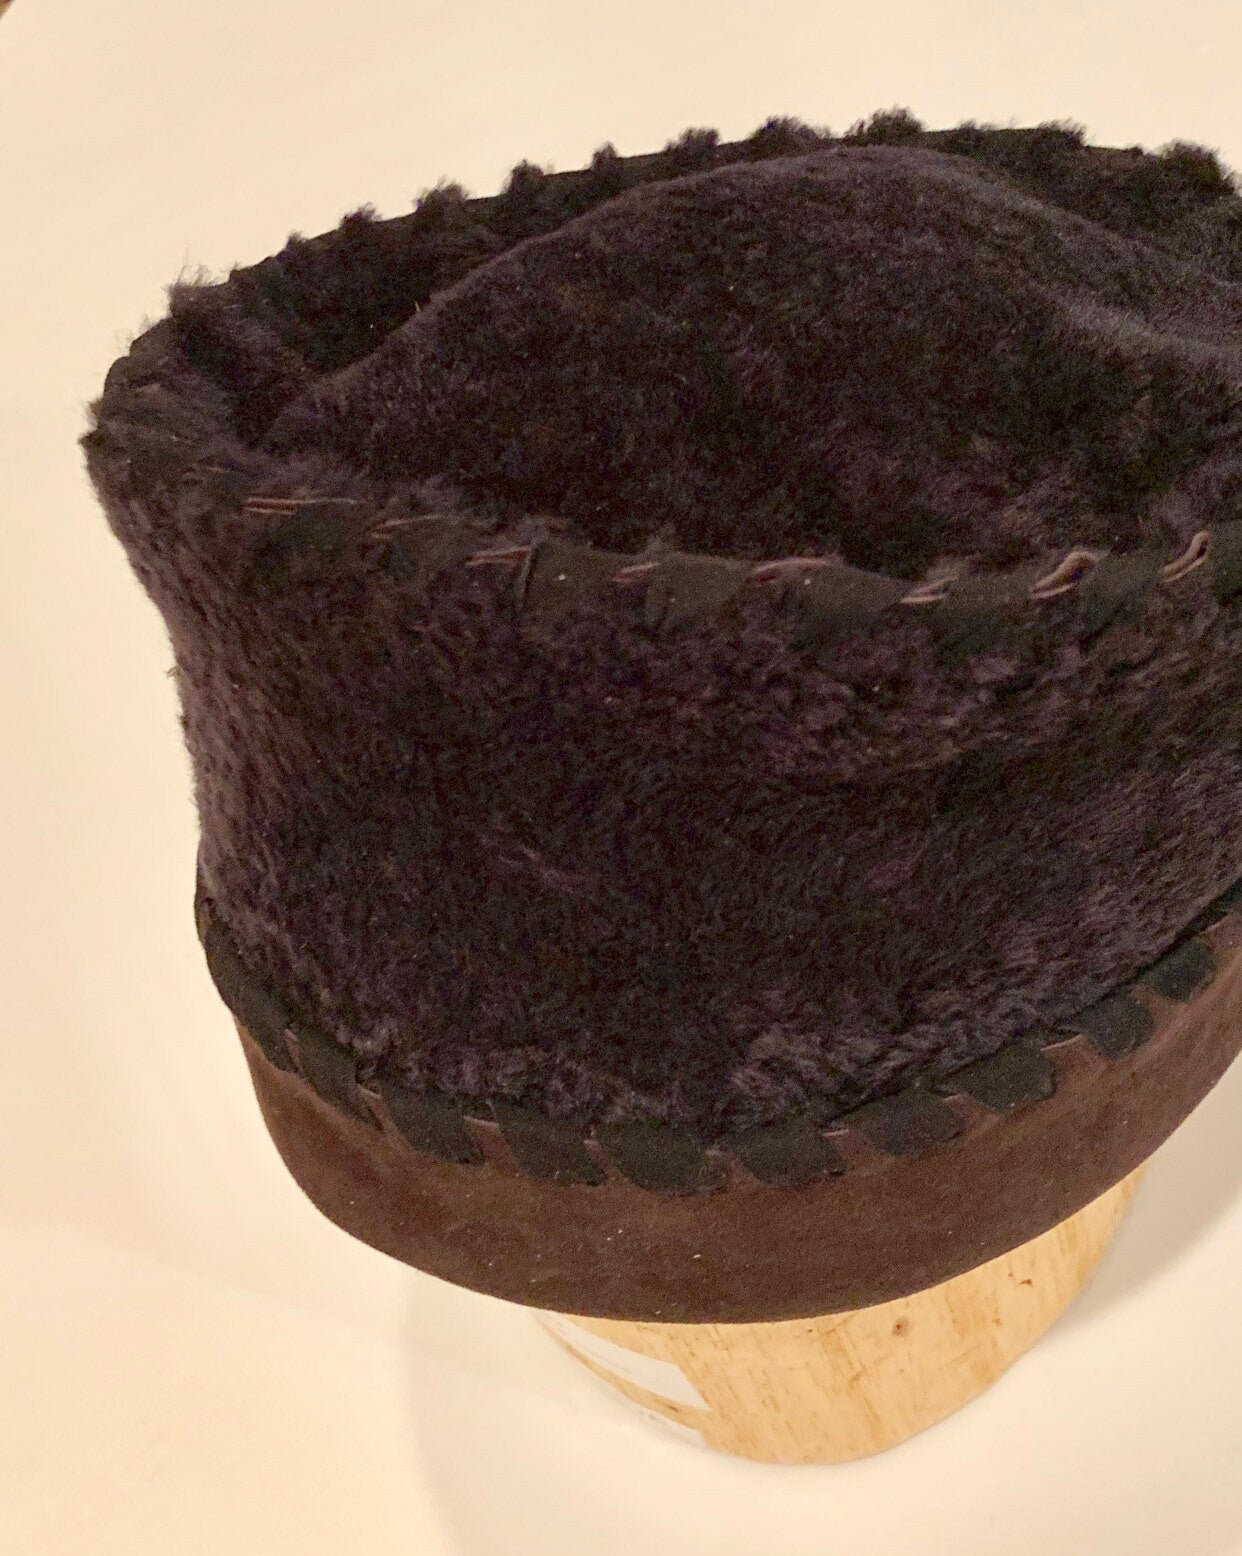 Black and Brown shearling leather hat with black leather lashing-warm winter hat-unisex hat-size Medium